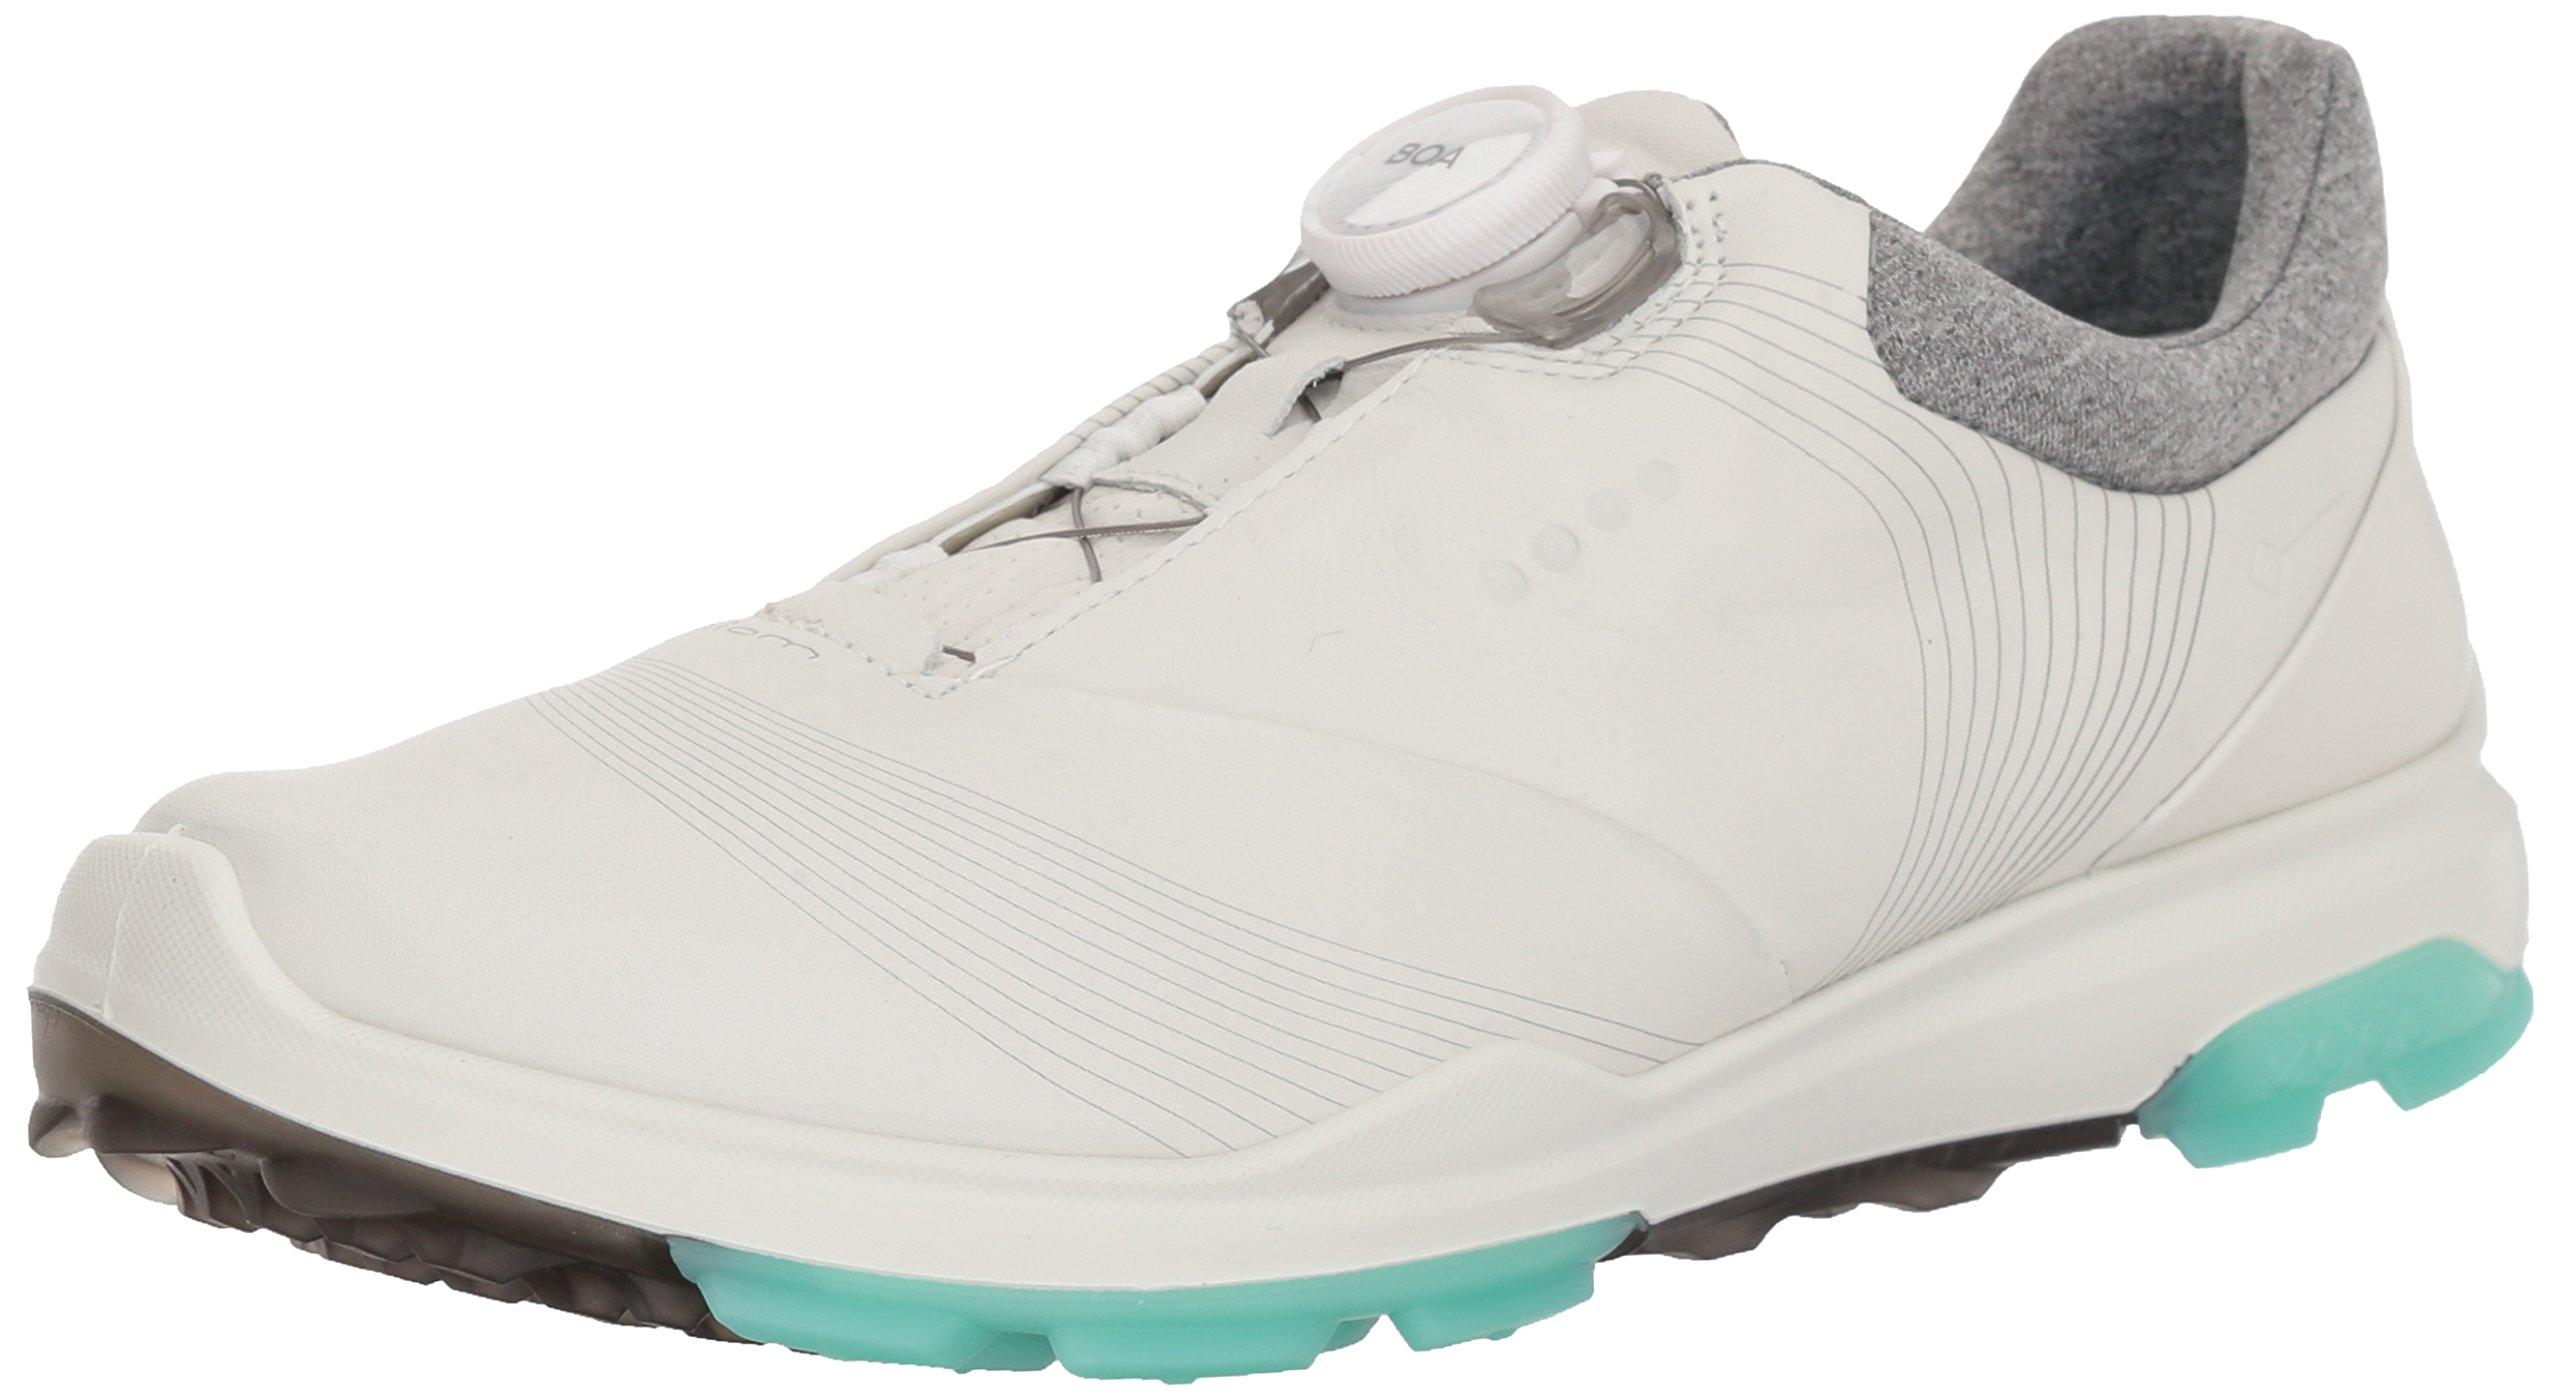 Ecco Synthetic Biom Hybrid 3 Gtx (white/teaberry) Women's Golf Shoes | Lyst